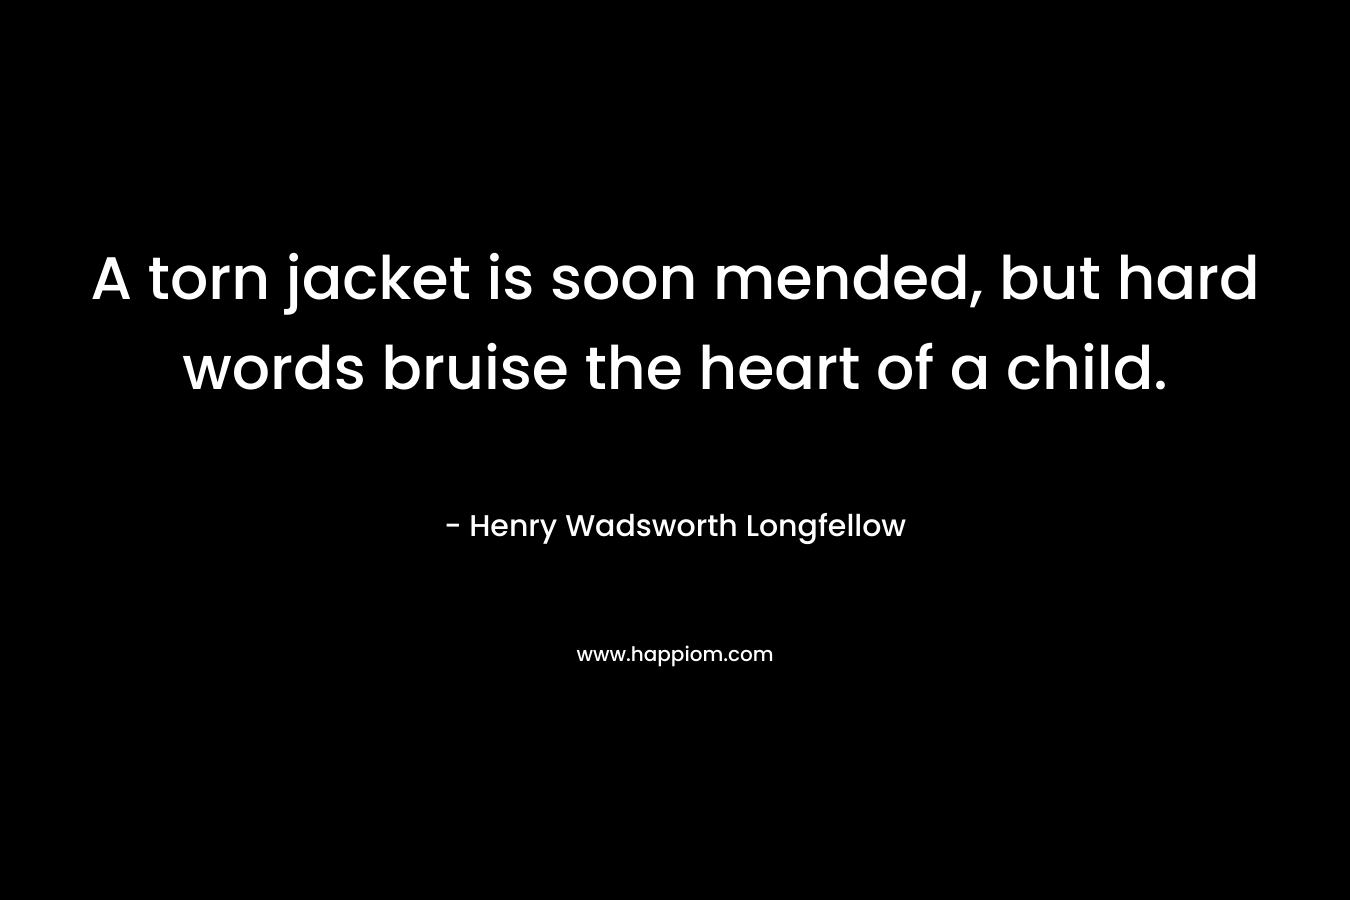 A torn jacket is soon mended, but hard words bruise the heart of a child.